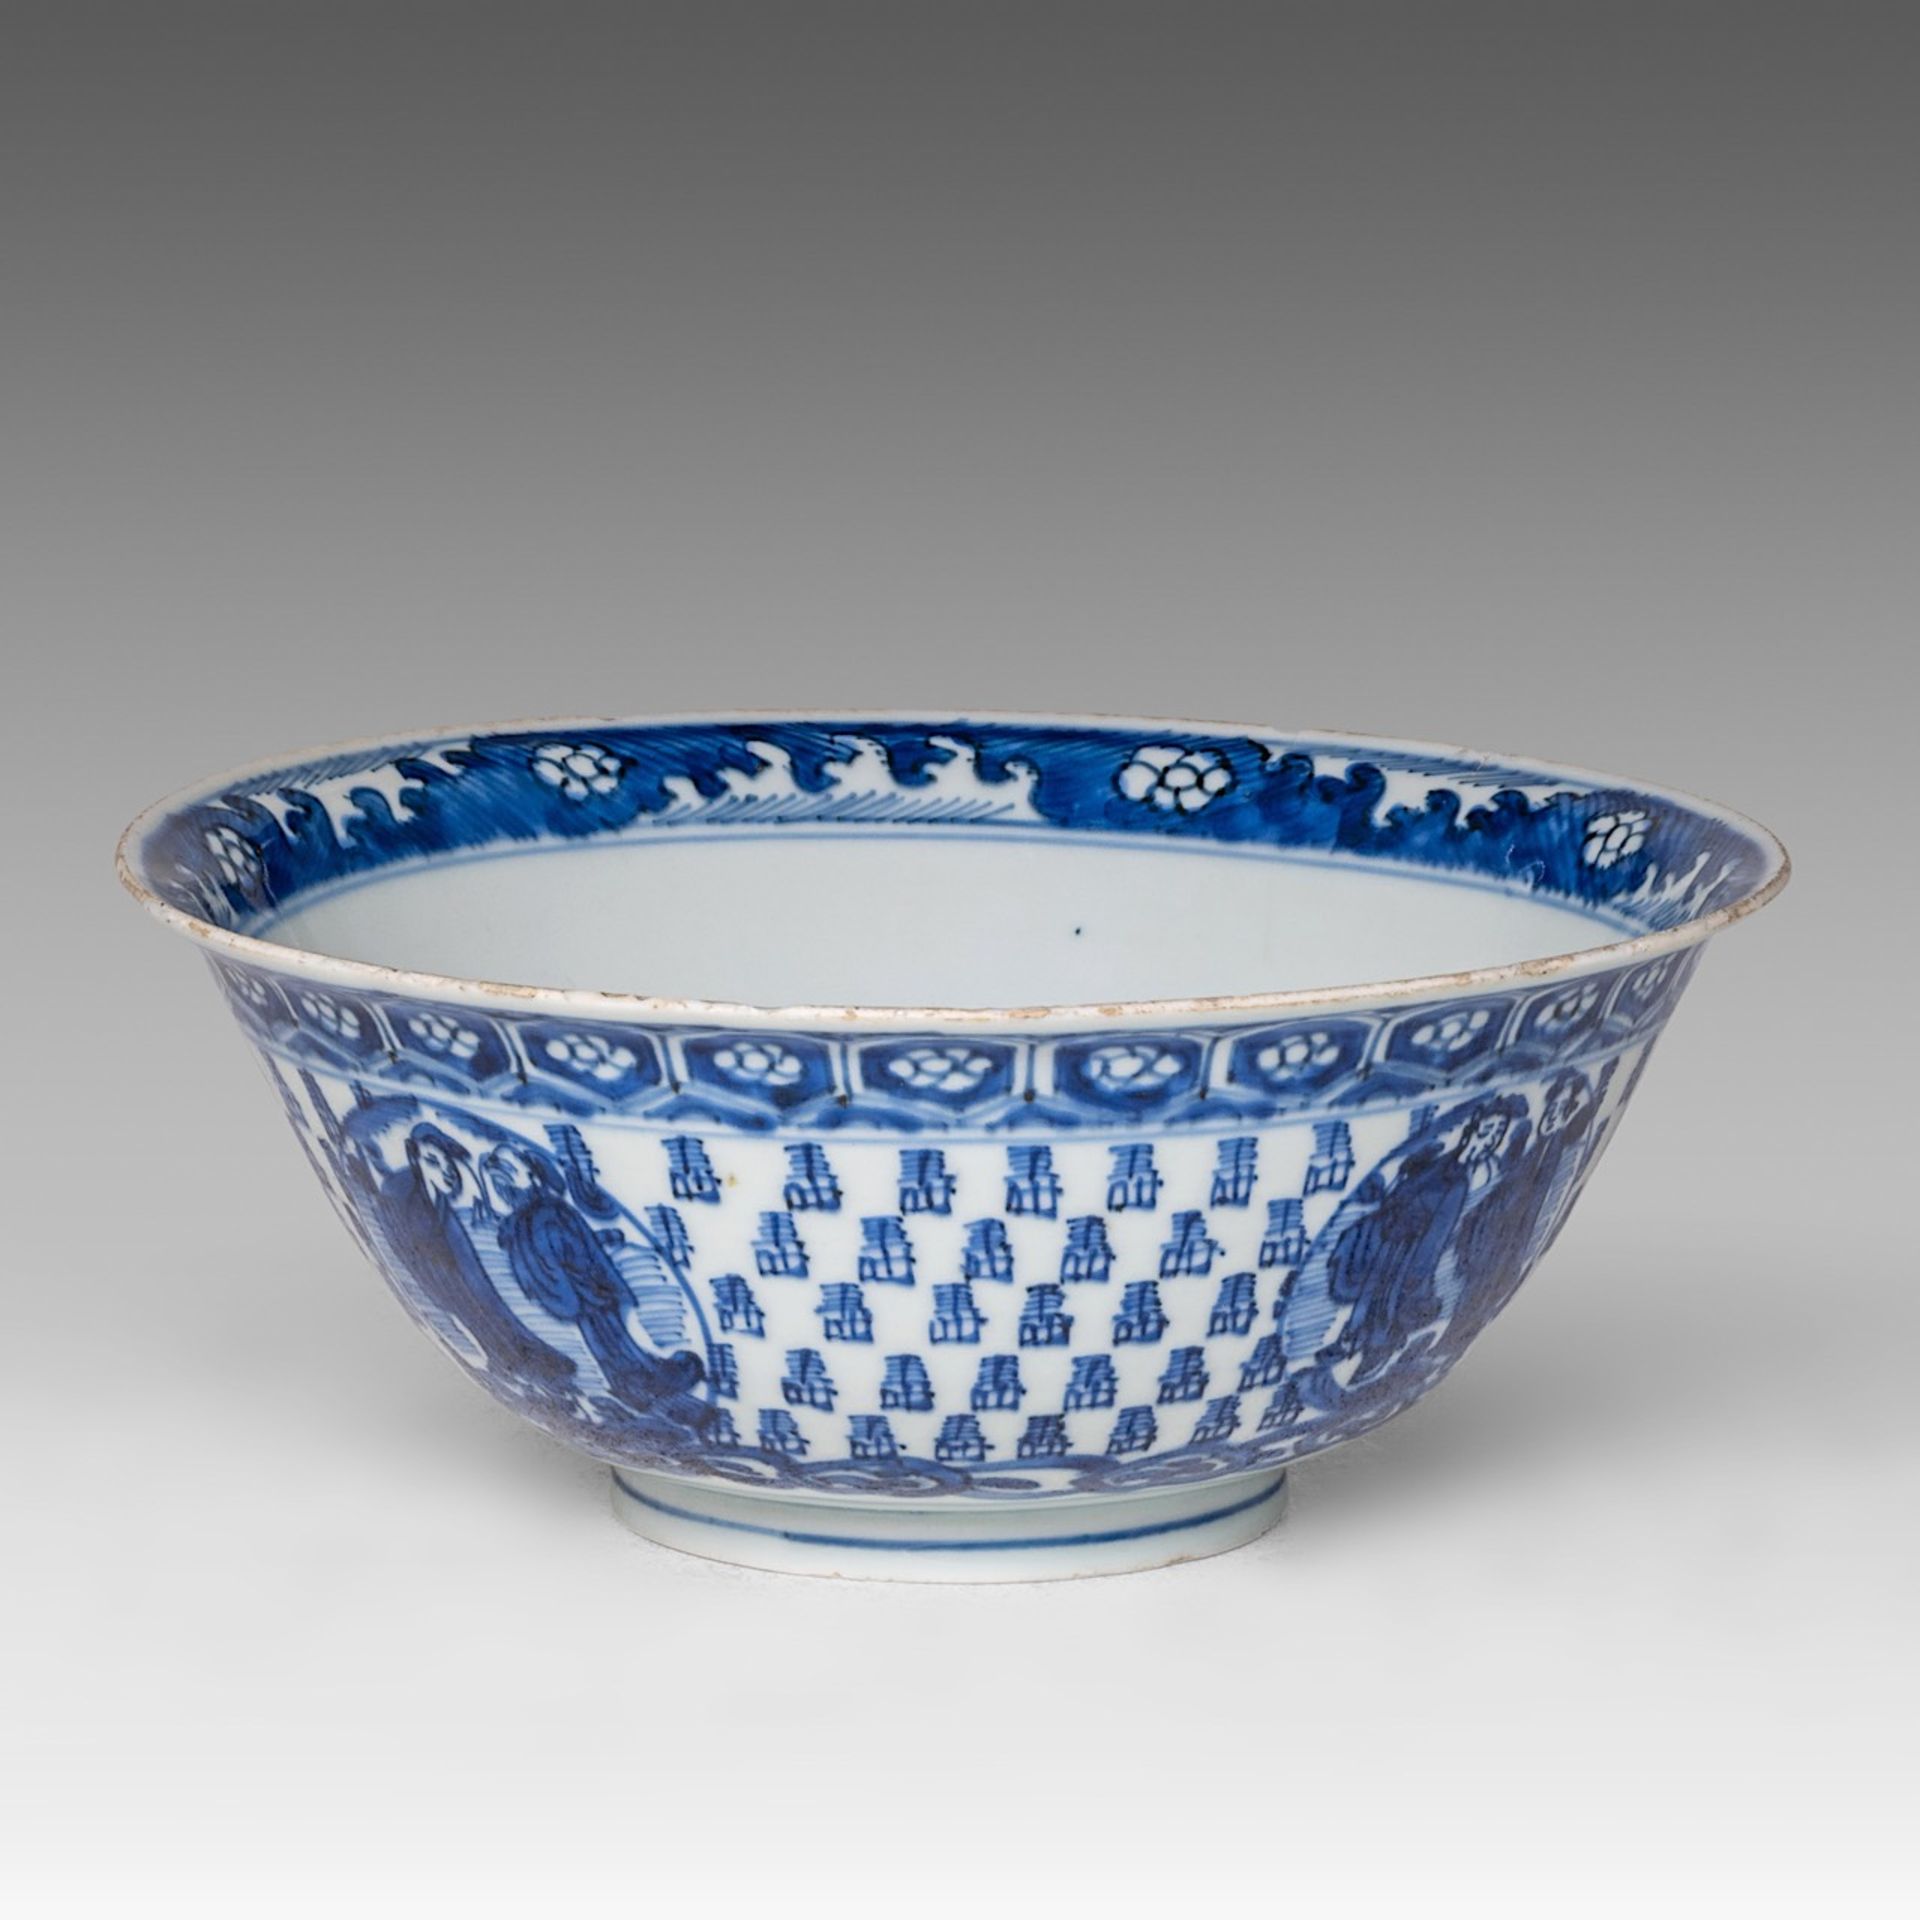 A Chinese blue and white 'Luohan' bowl, Wanli period, Ming dynasty, H 9 - dia 22,5 cm - Image 4 of 8